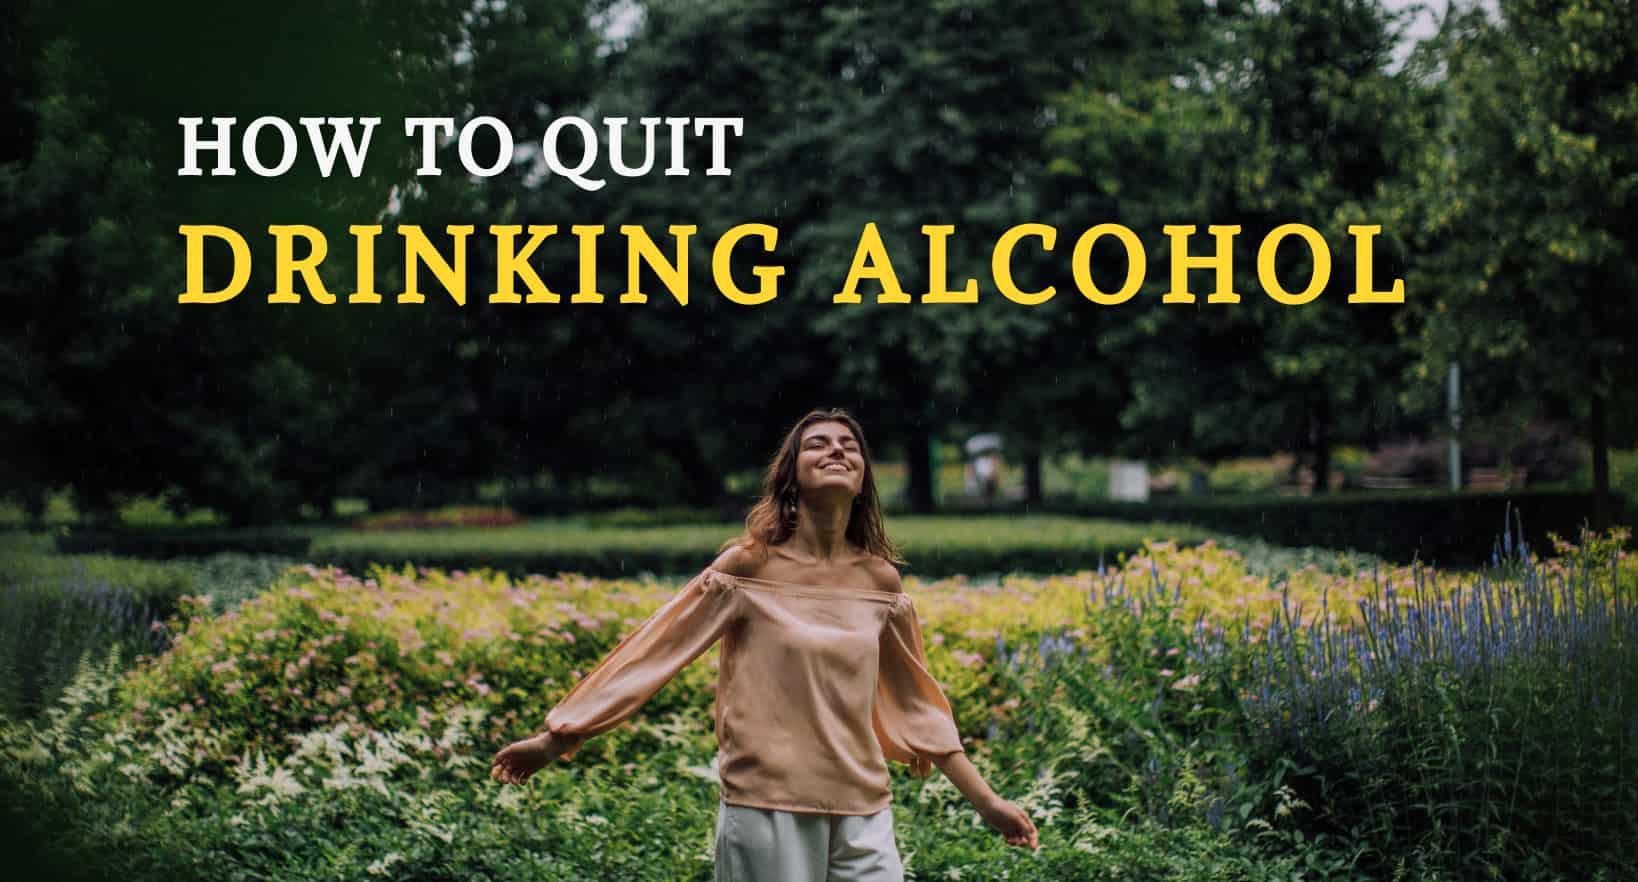 A woman is happy to quit drinking alcohol.